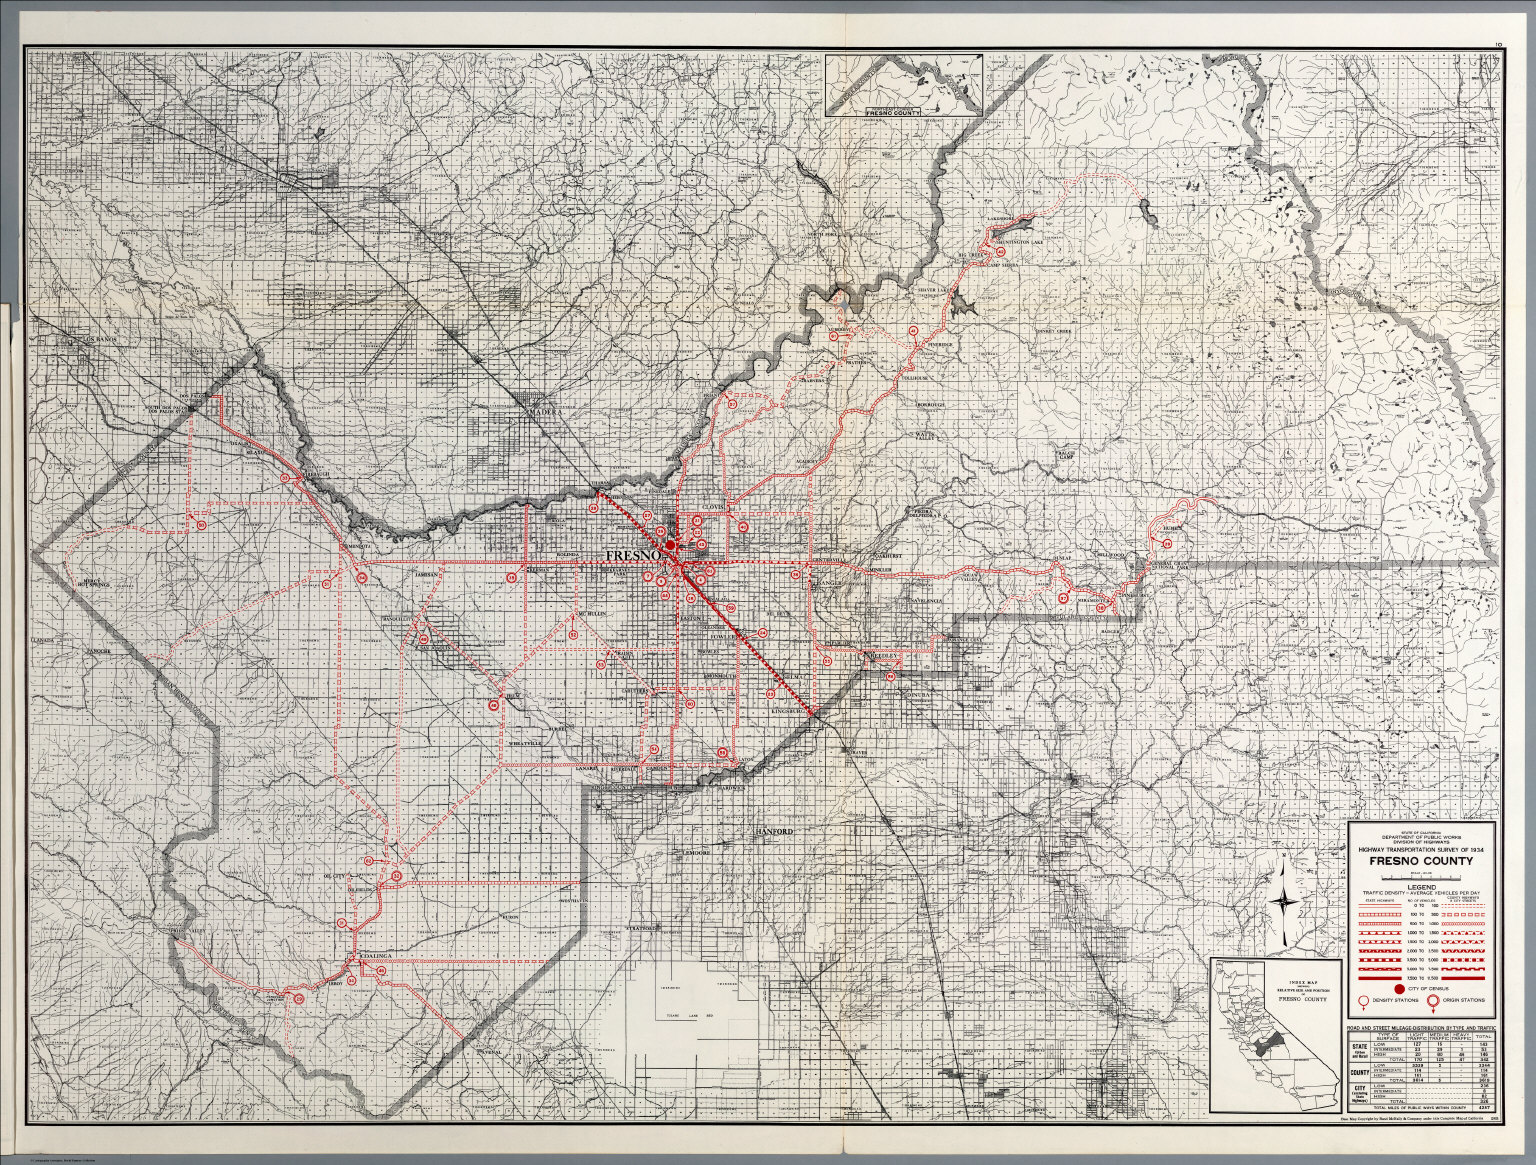 Fresno County David Rumsey Historical Map Collection